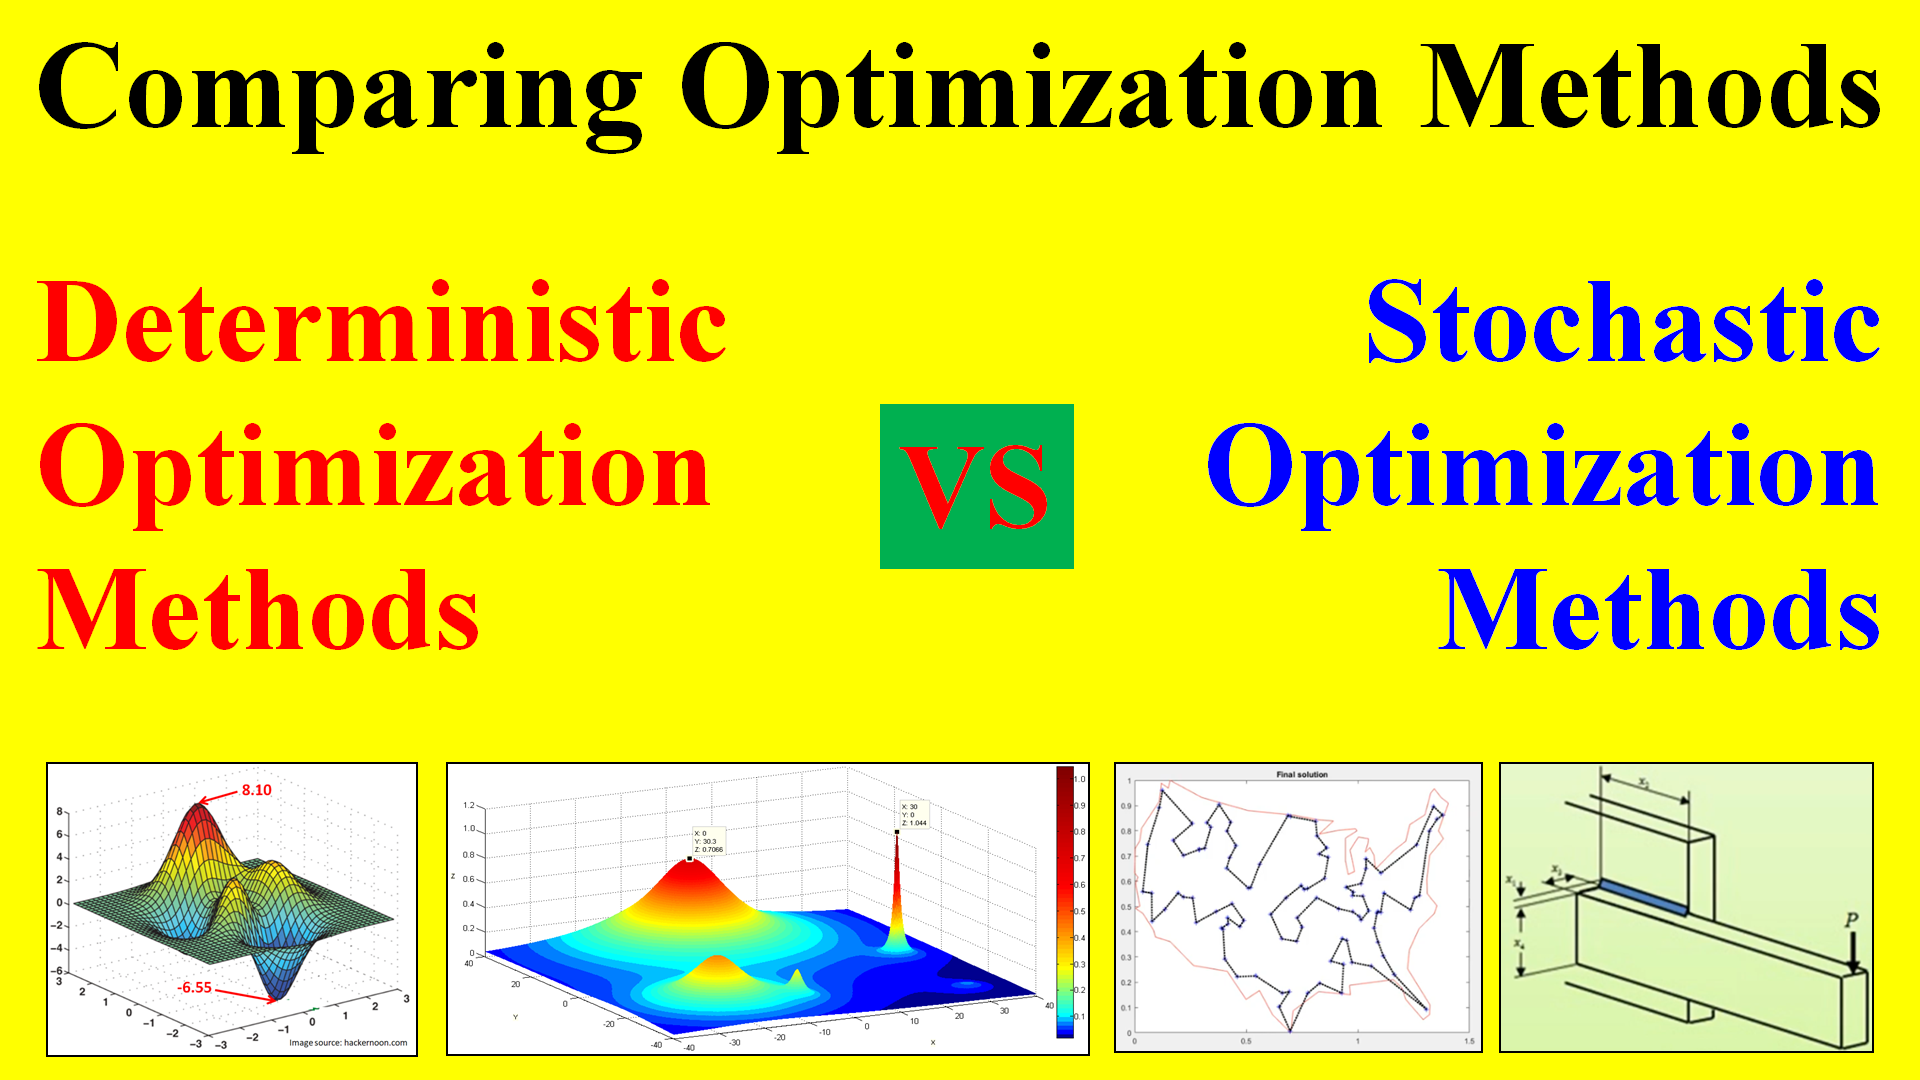 Comparing Different Characteristics of Deterministic and Stochastic Optimization Methods